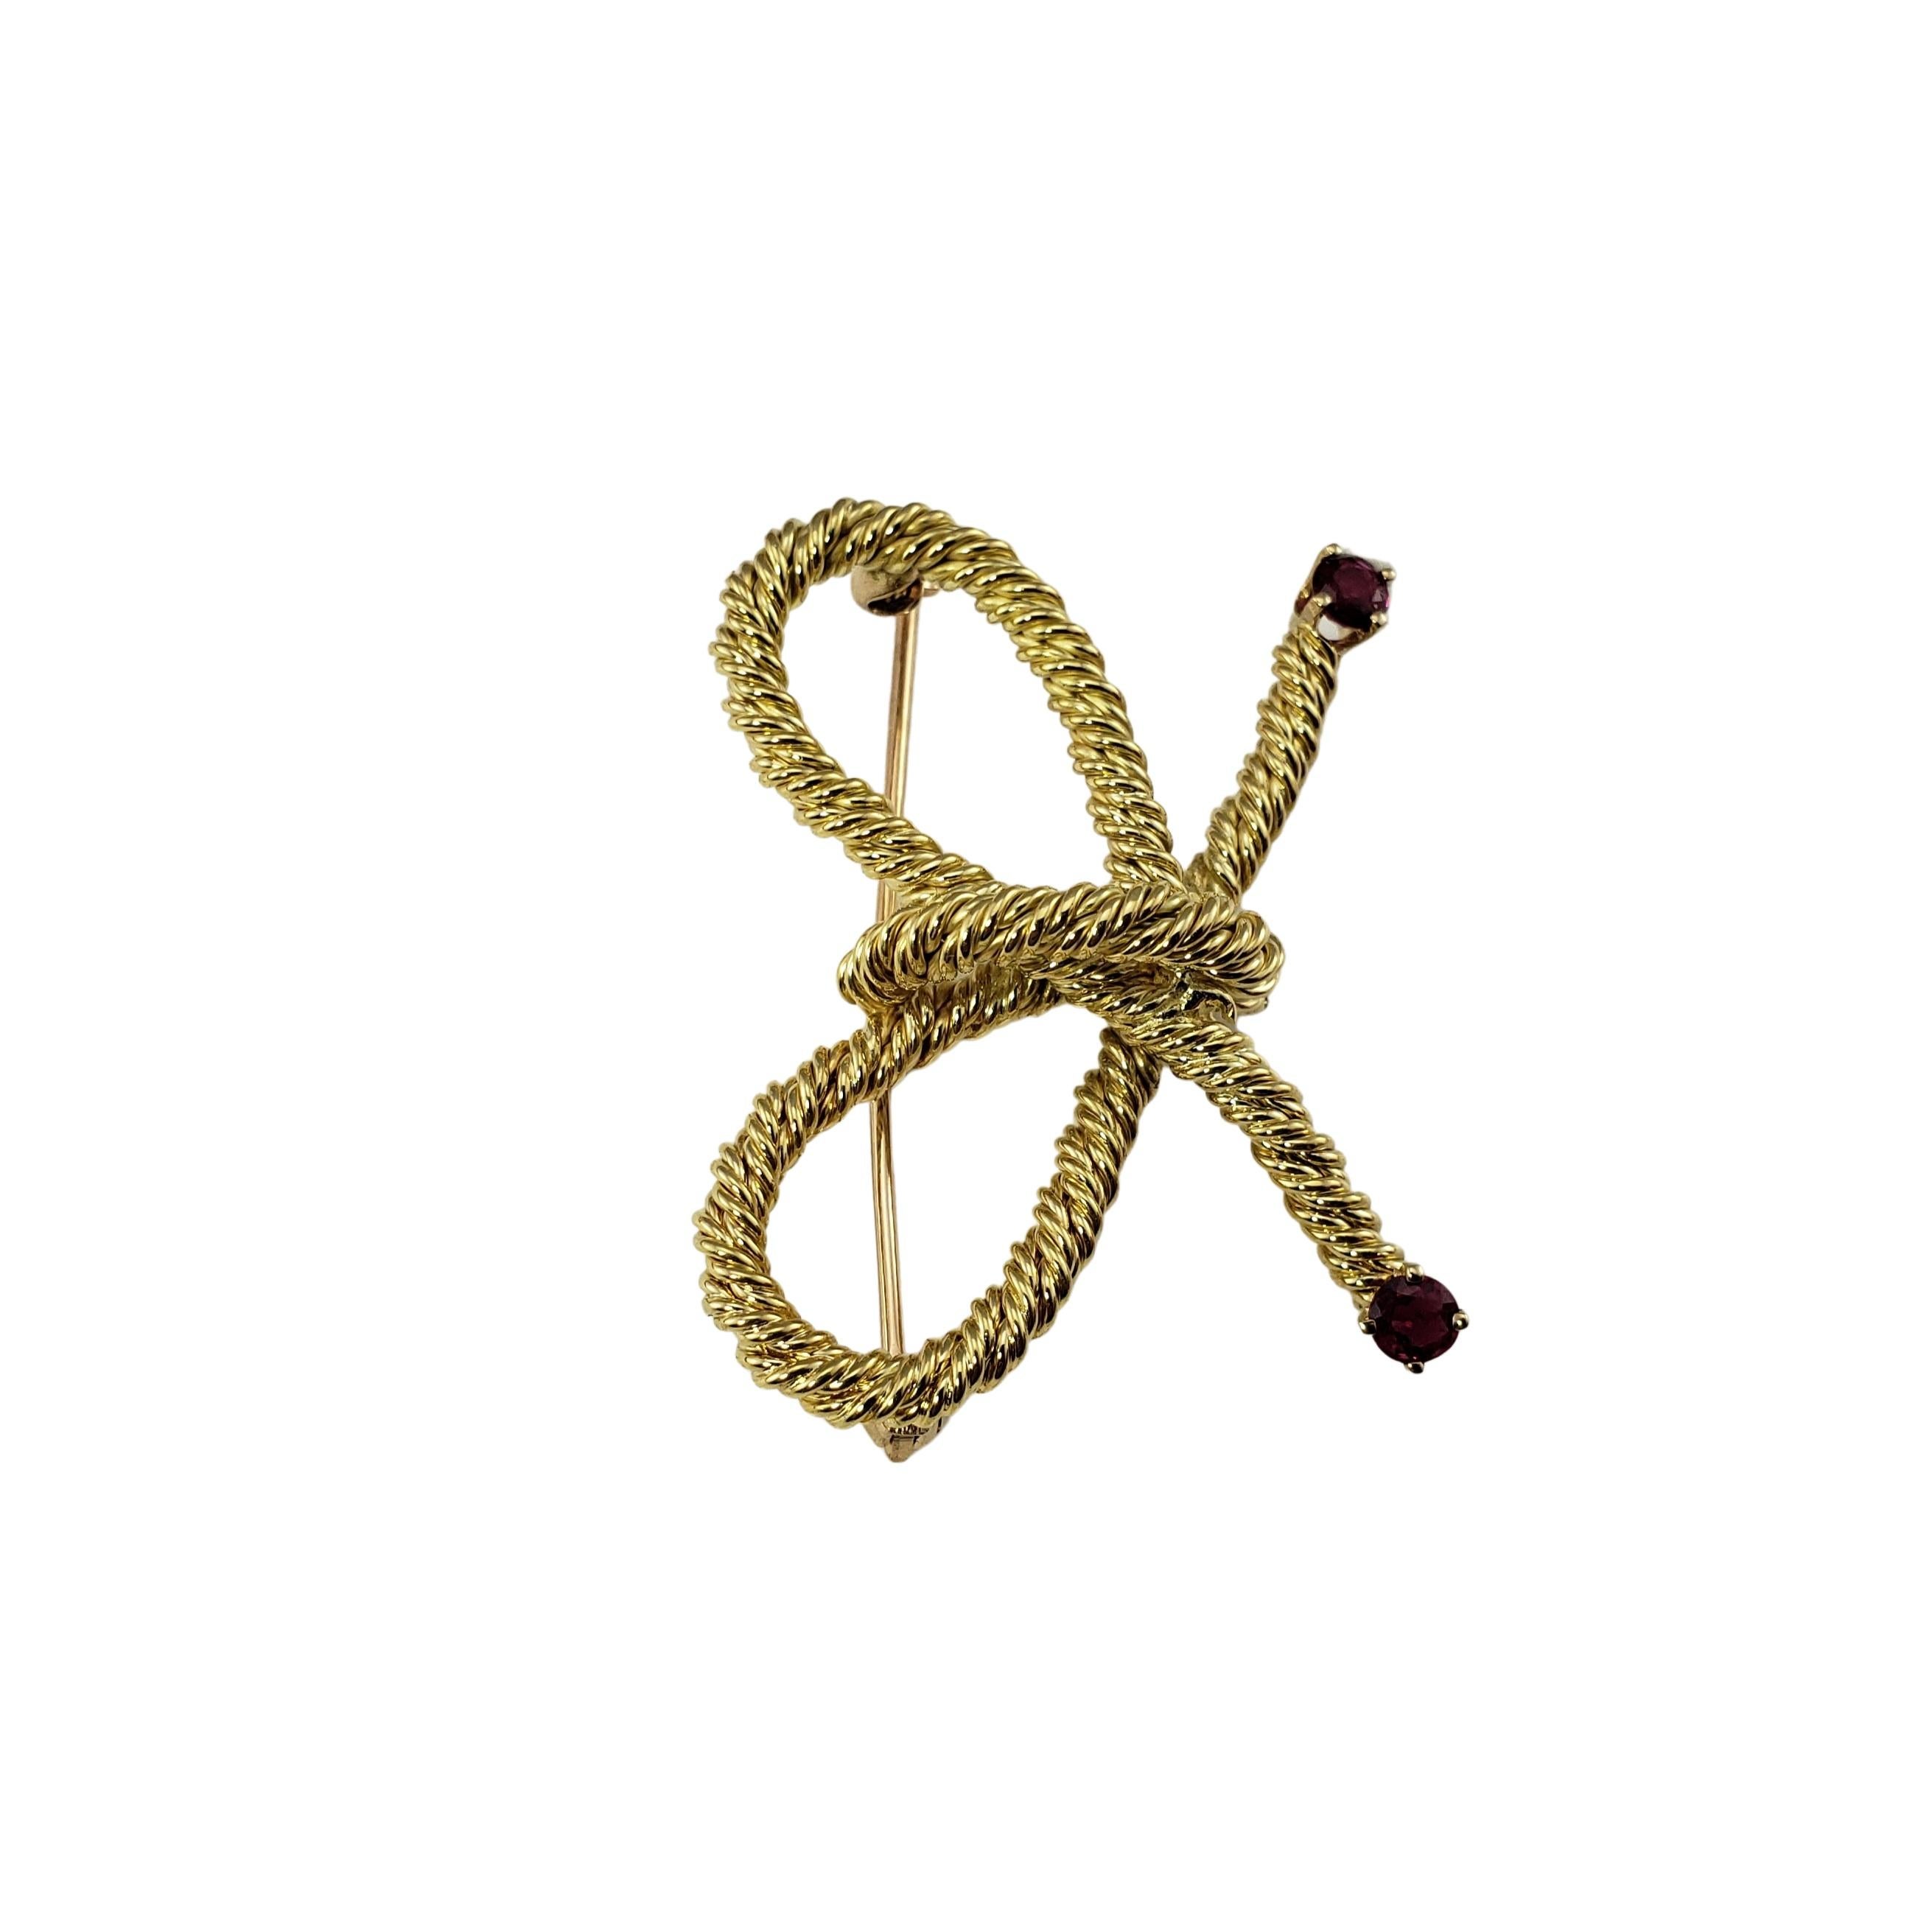 Tiffany & Co 18 Karat Yellow Gold and Ruby Brooch/Pin-

This elegant Tiffany pin is crafted in beautifully detailed 18K yellow gold and accented with two ruby gemstones.

Size:  25 mm x  35 mm

Weight:  6.1 dwt. / 9.5 gr.

Hallmark:  18K  Tiffany &